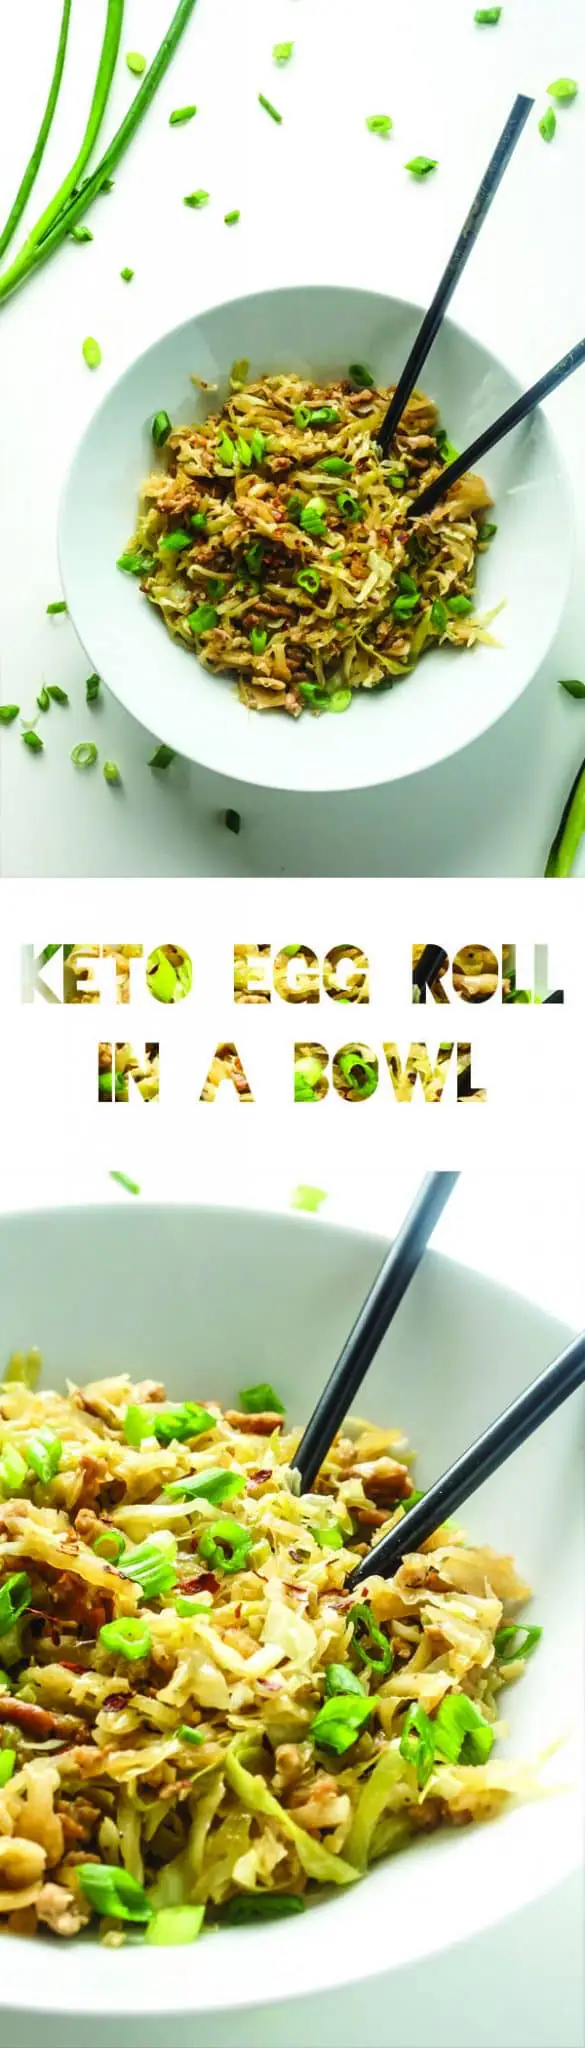 Keto Egg Roll in a Bowl Recipe | Cabbage | Low Carb Vegetable | Atkins | LCHF